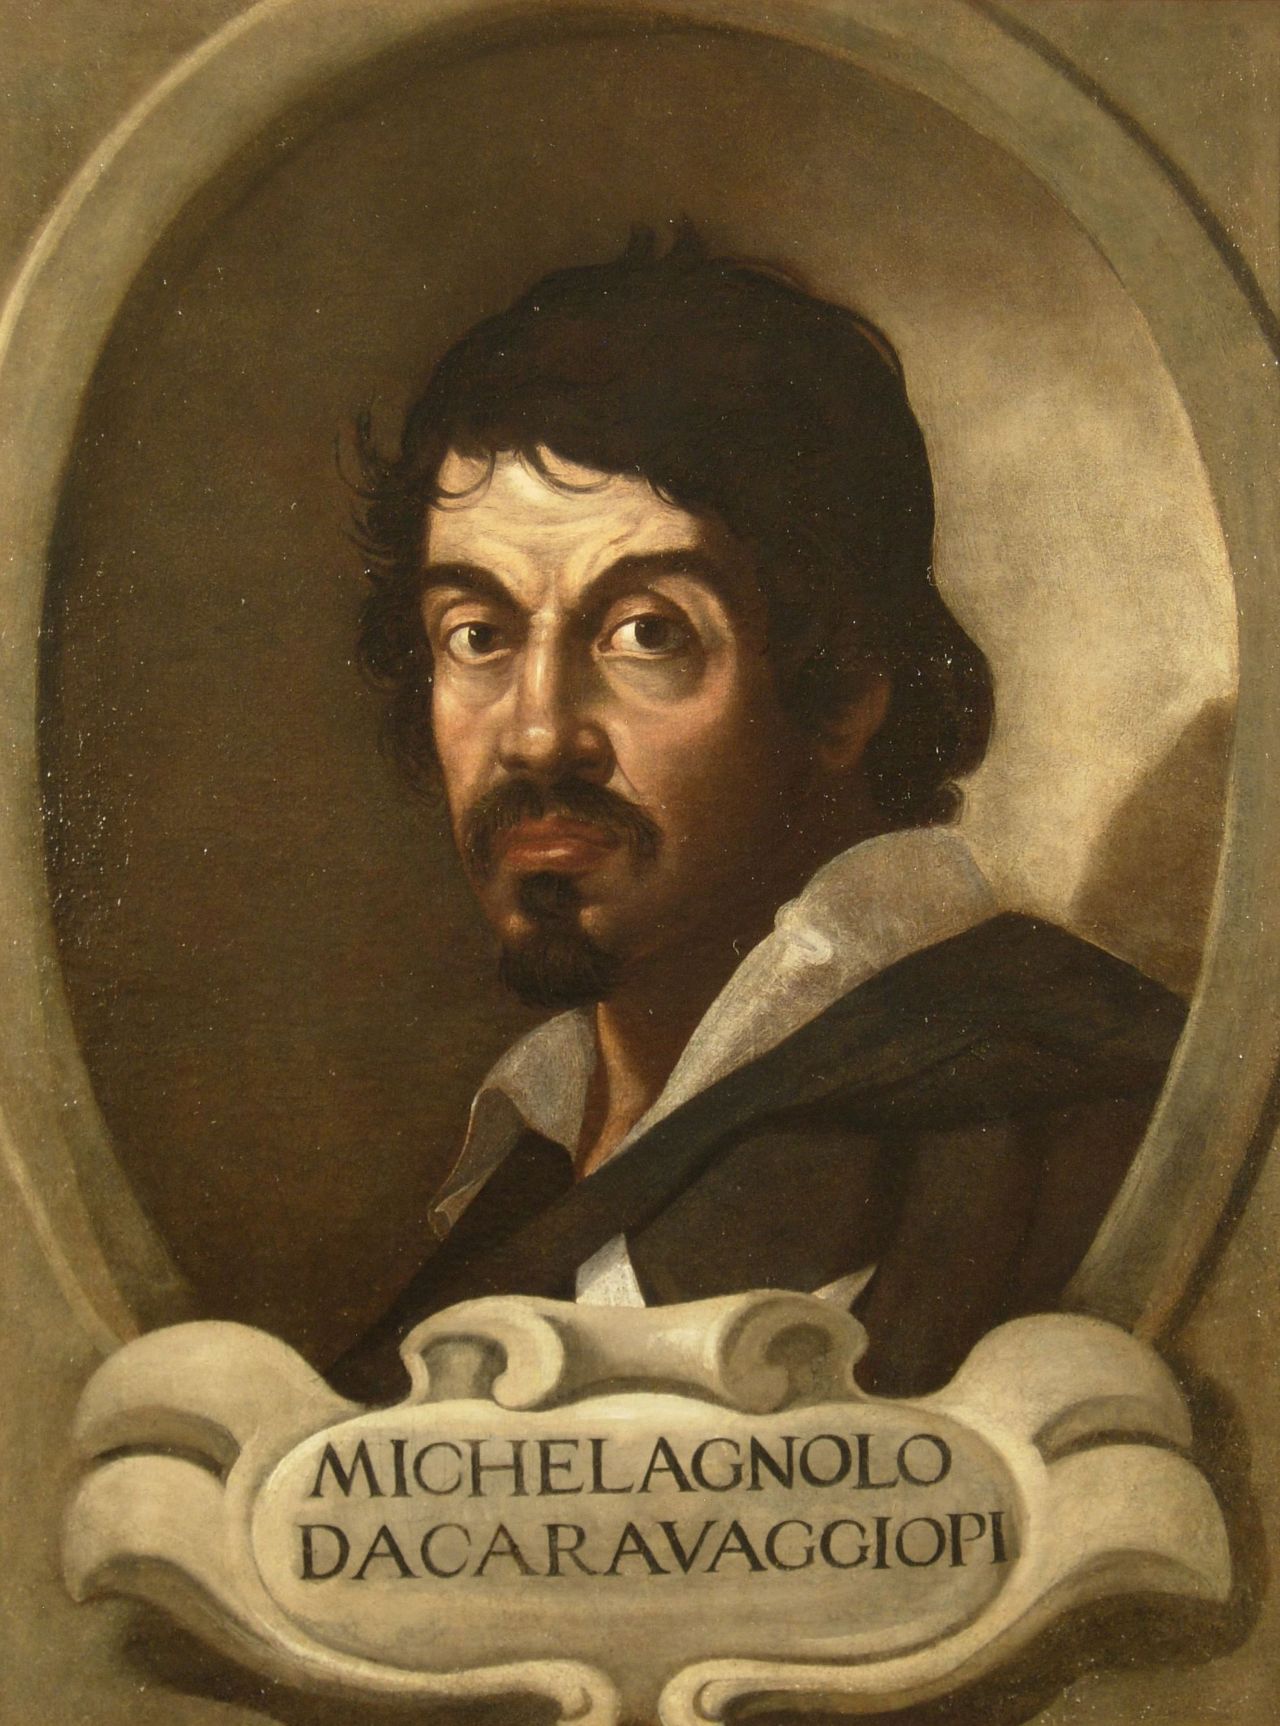 Portrait of Michelangelo Merisi da Caravaggio, 17th century. Found in the collection of National Museum of Western Art, Tokyo.